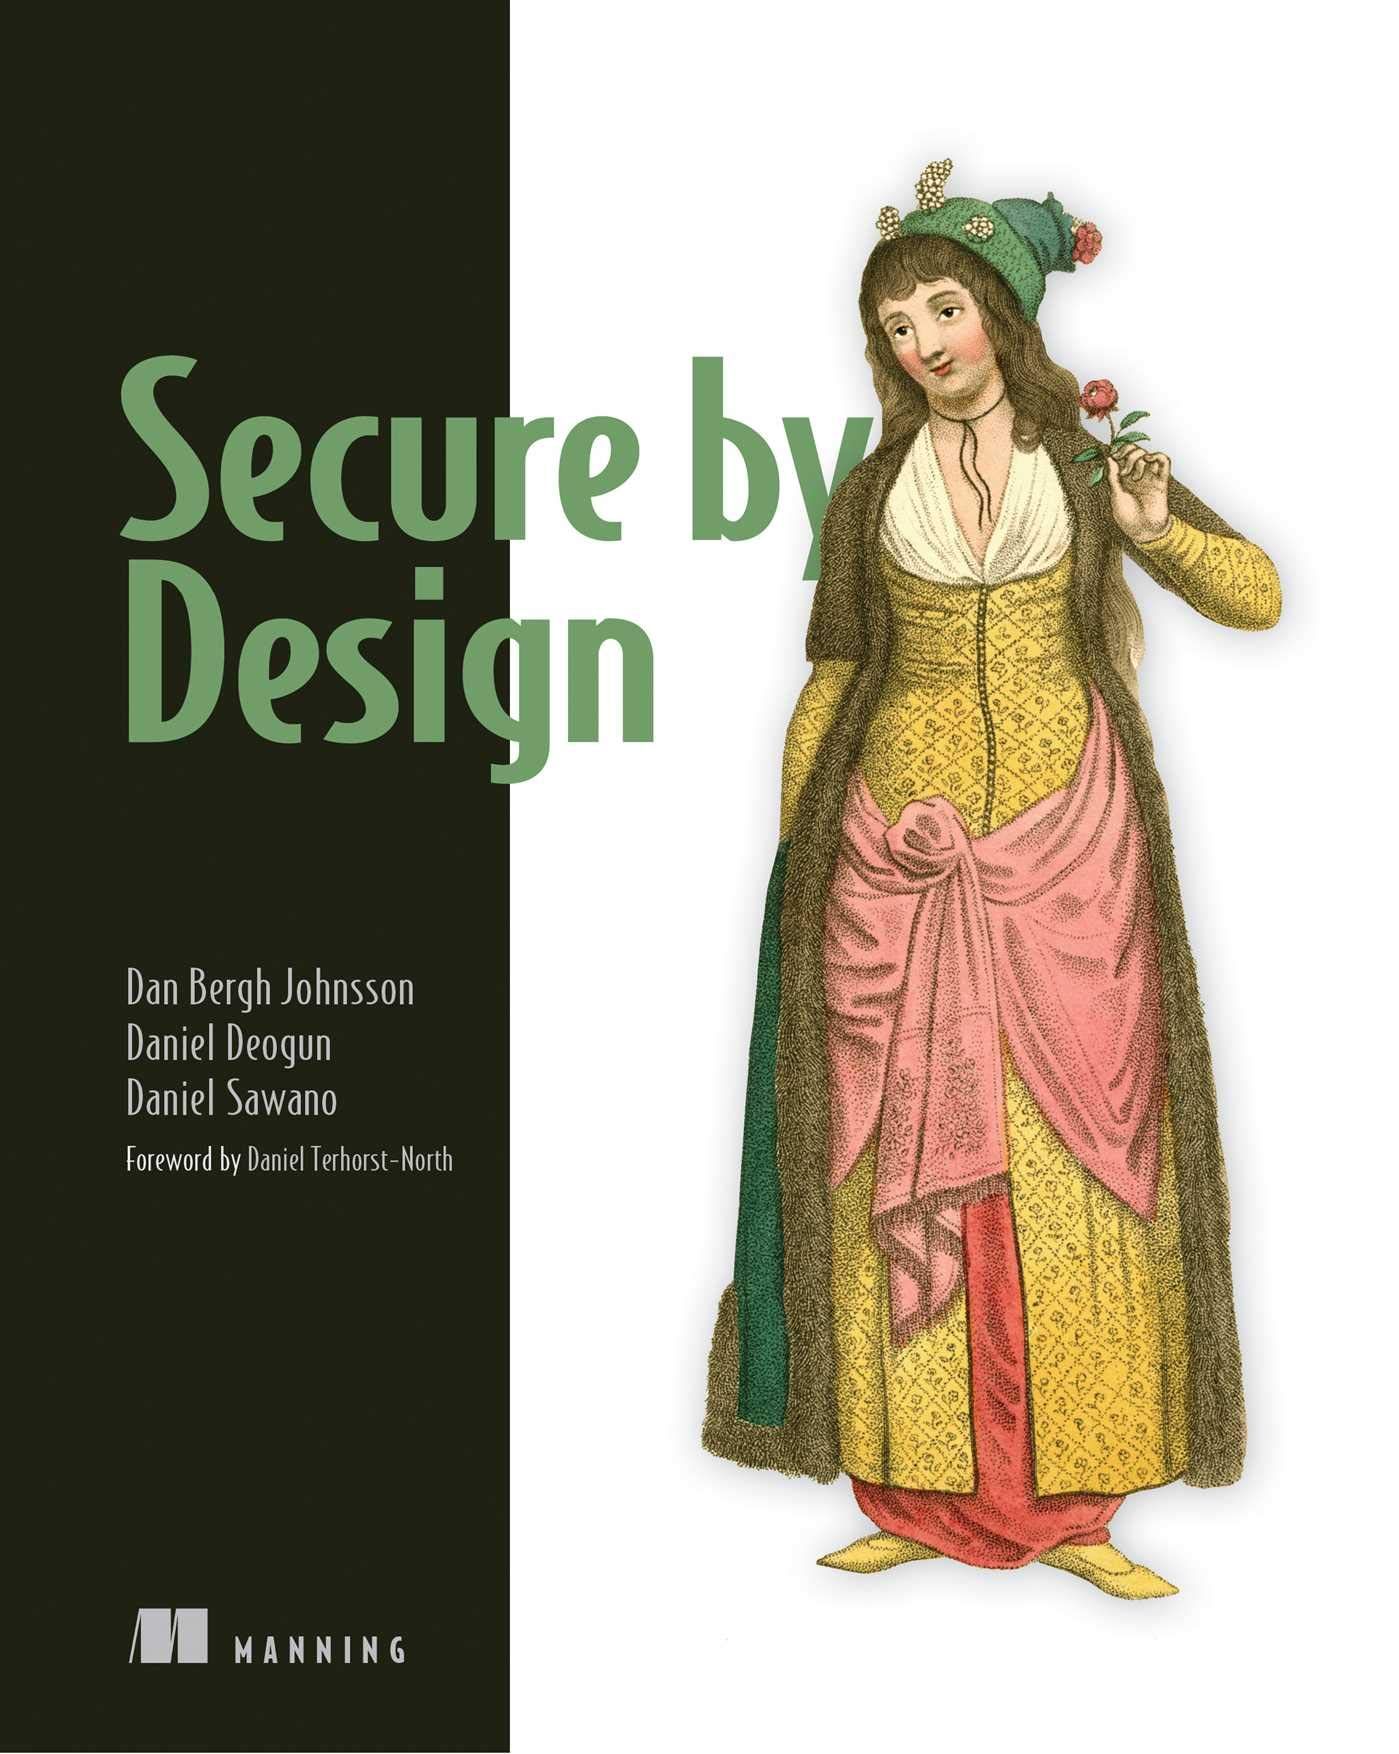 A book cover. The book is called Secure By Design. It shows a picture of a woman in traditional garb.